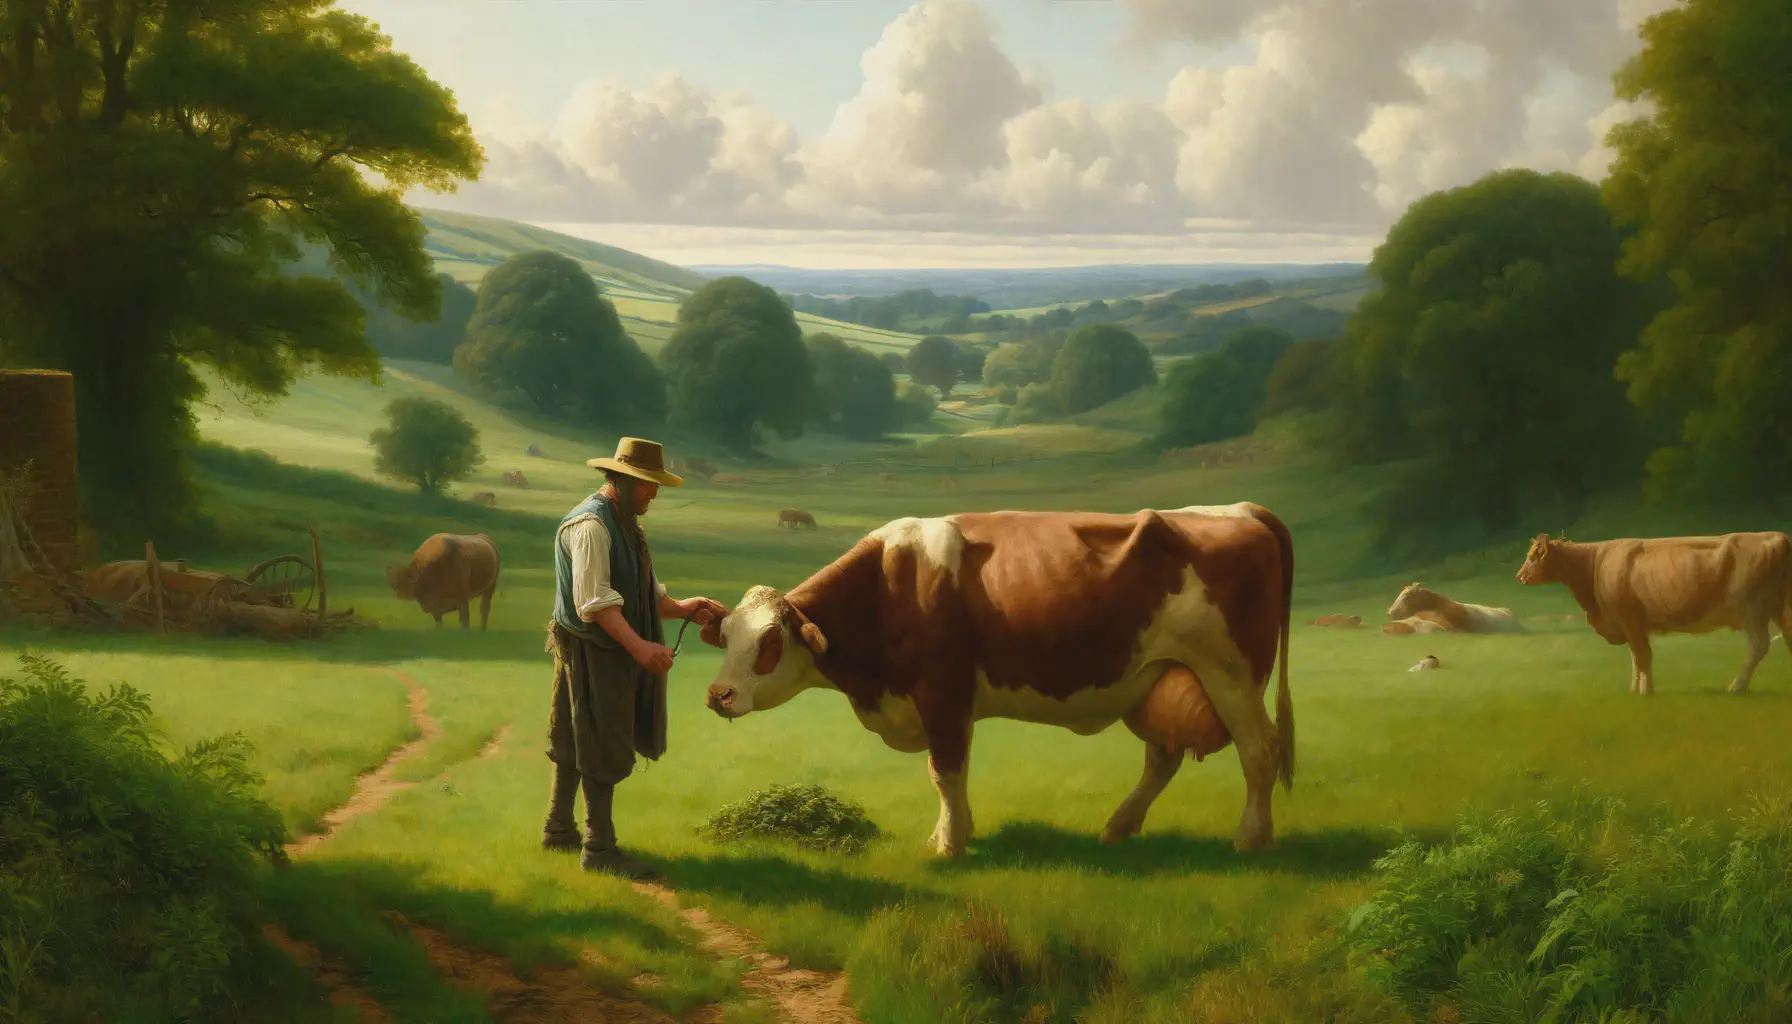 A farmer inspecting a cow. Image in style of John Constable.